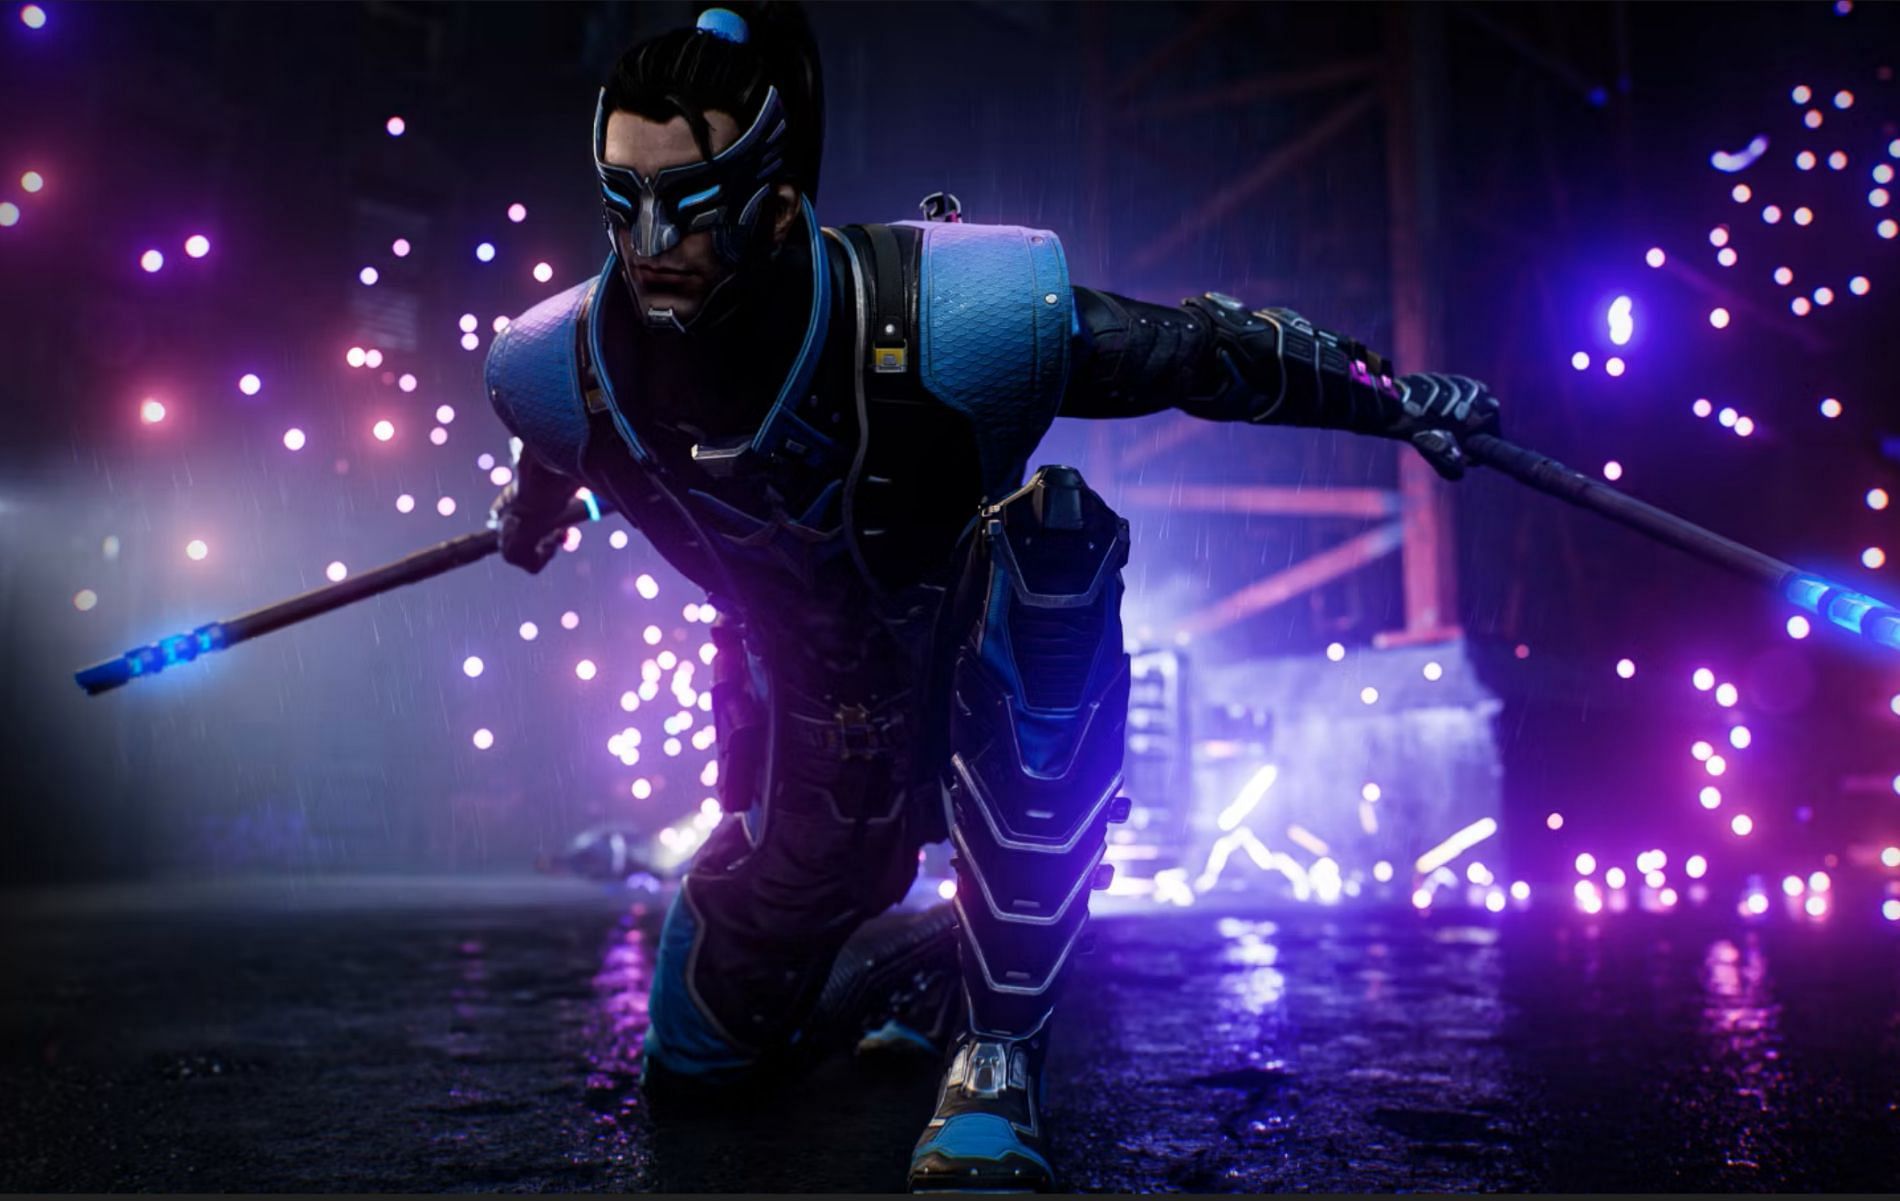 Executing a Perfect Dodge and Perfect Attack in Gotham Knights (Image via Gotham Knights)